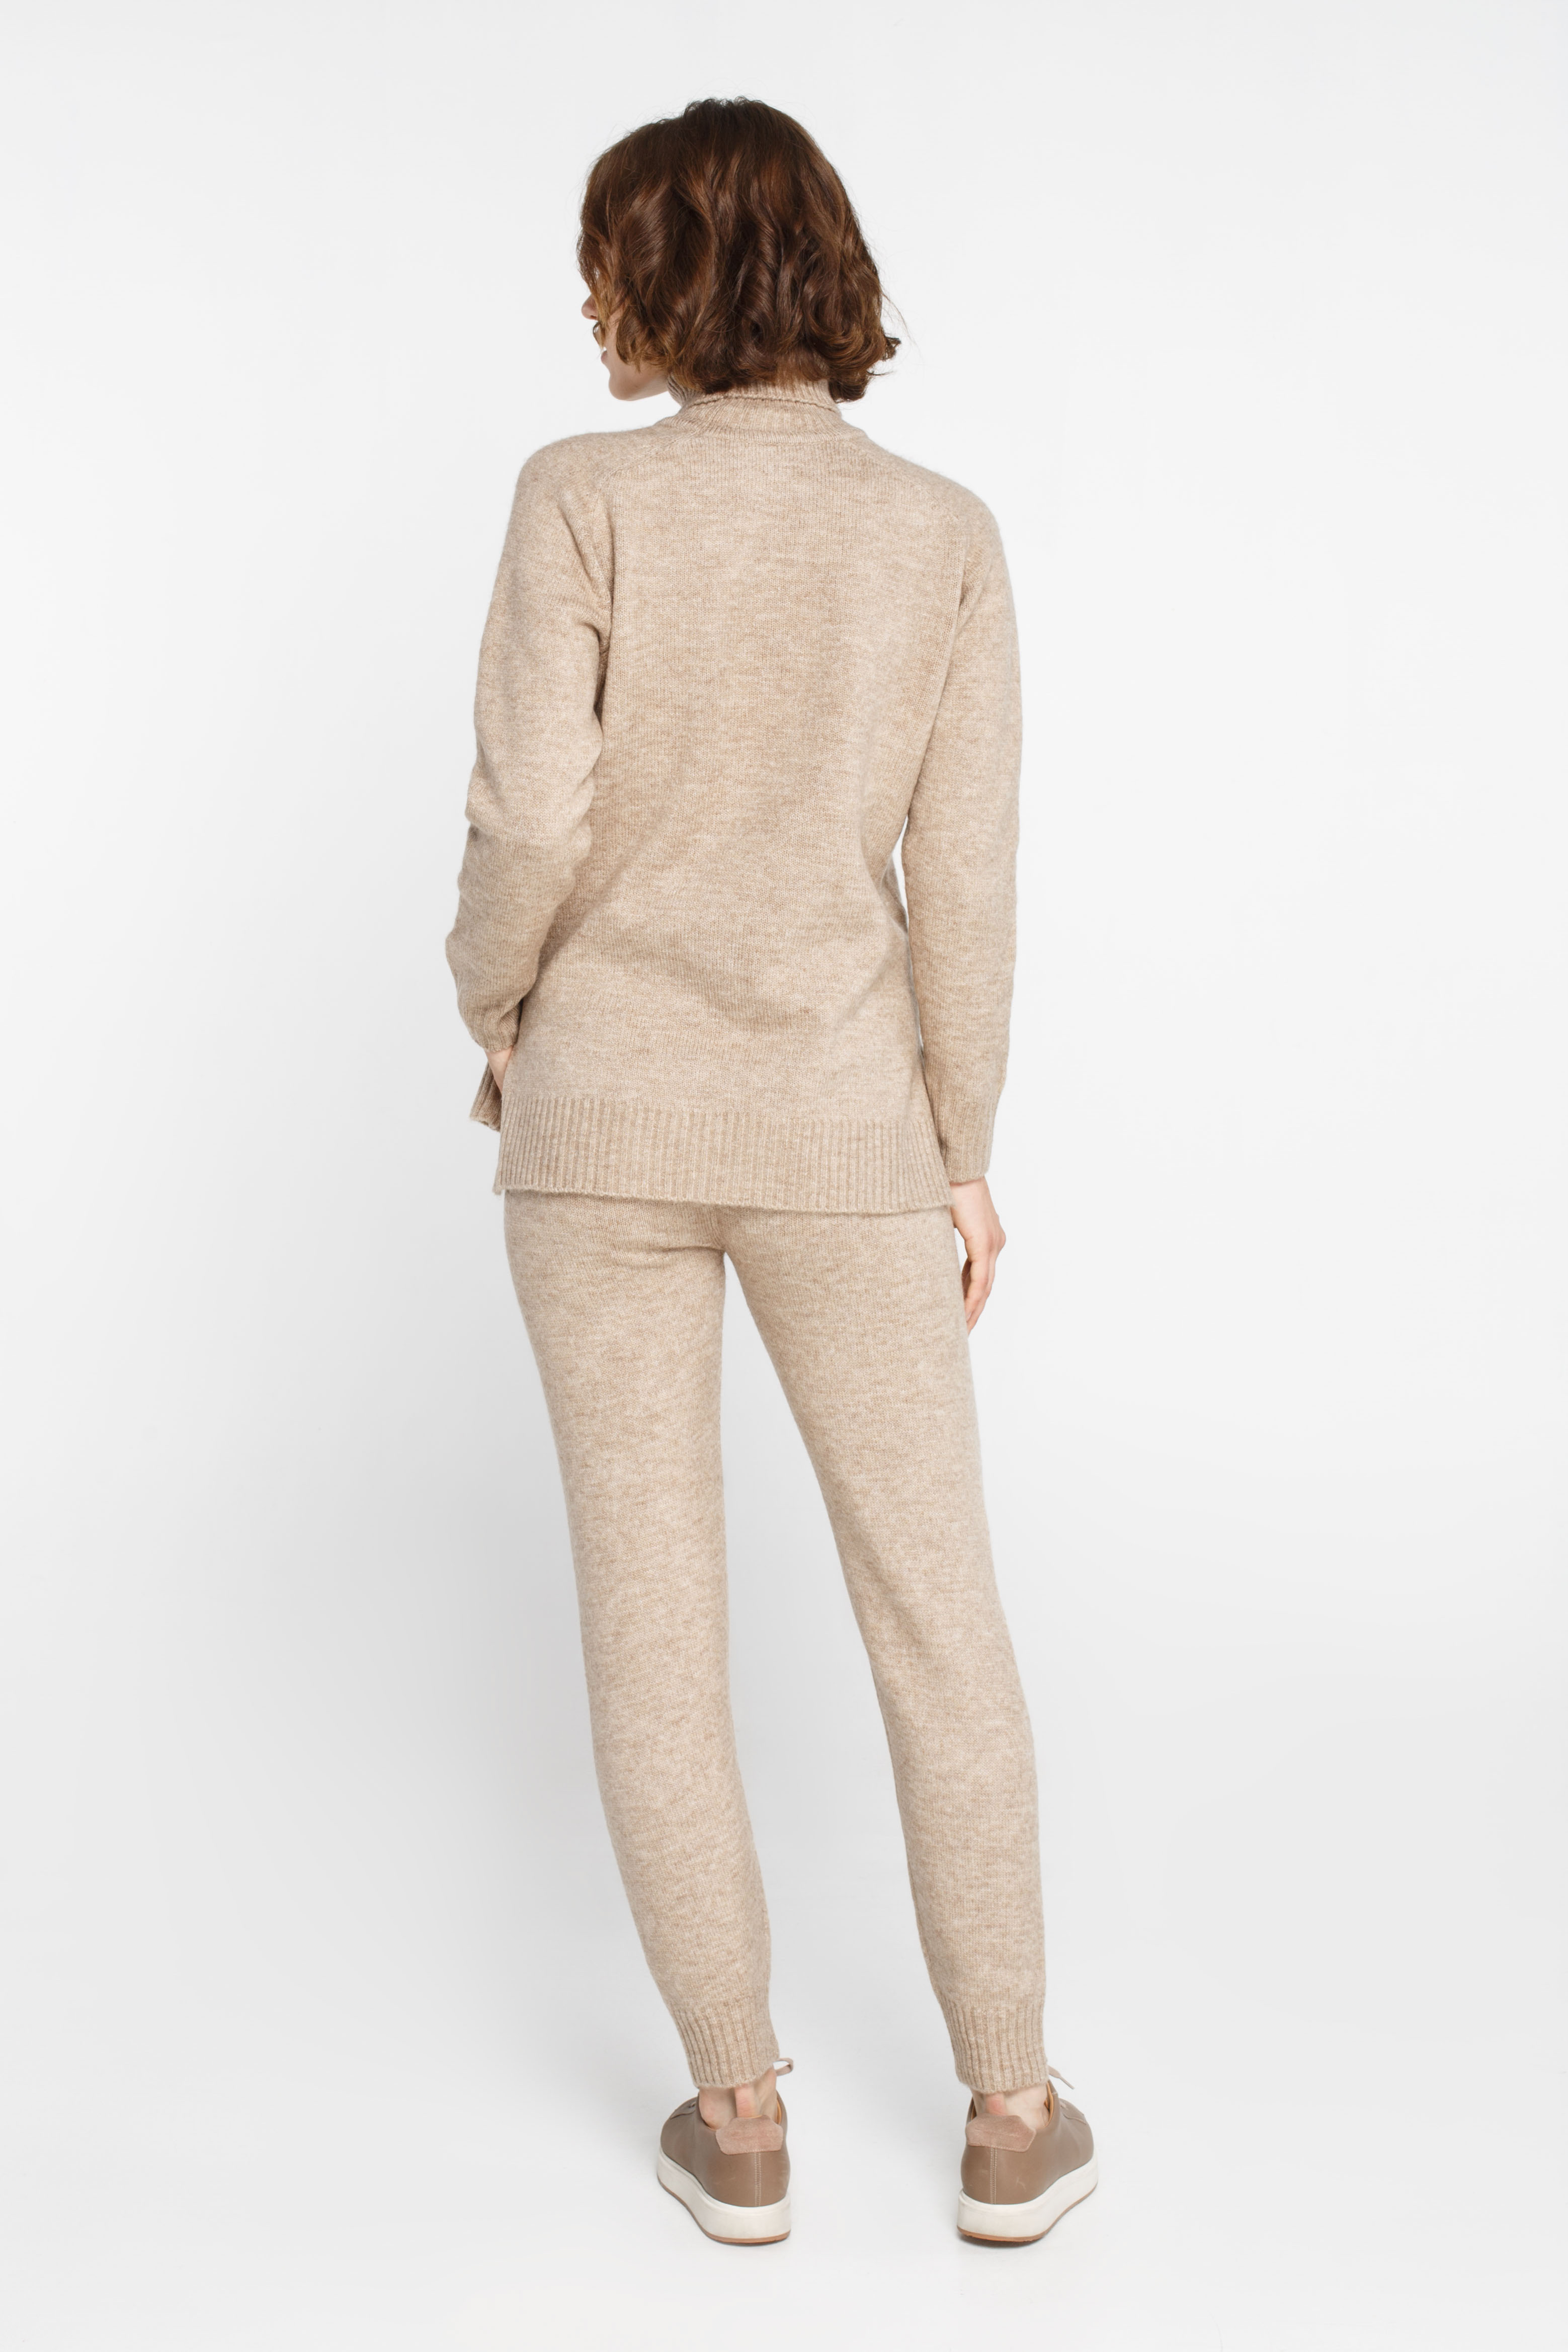 Beige turtleneck sweater with wool, photo 5